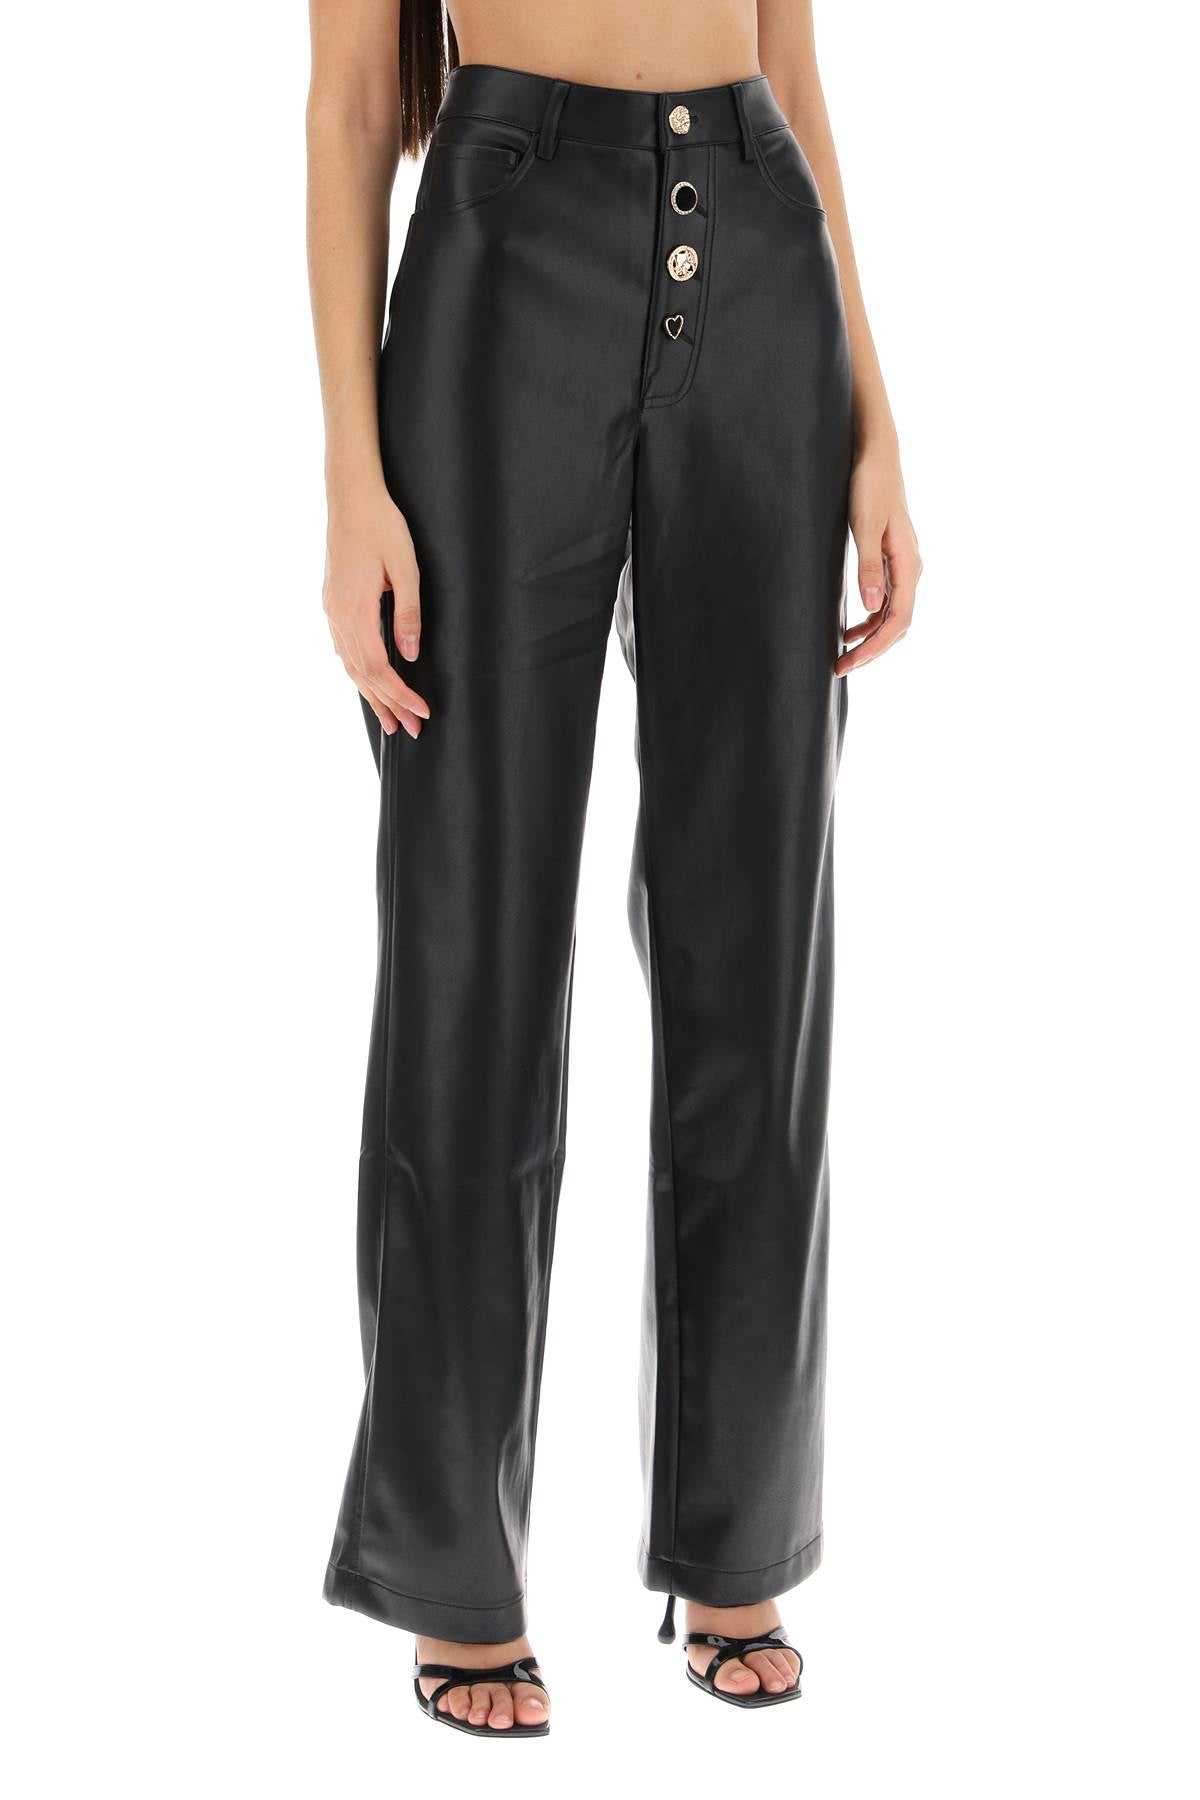 Rotate embellished button faux leather pants-1